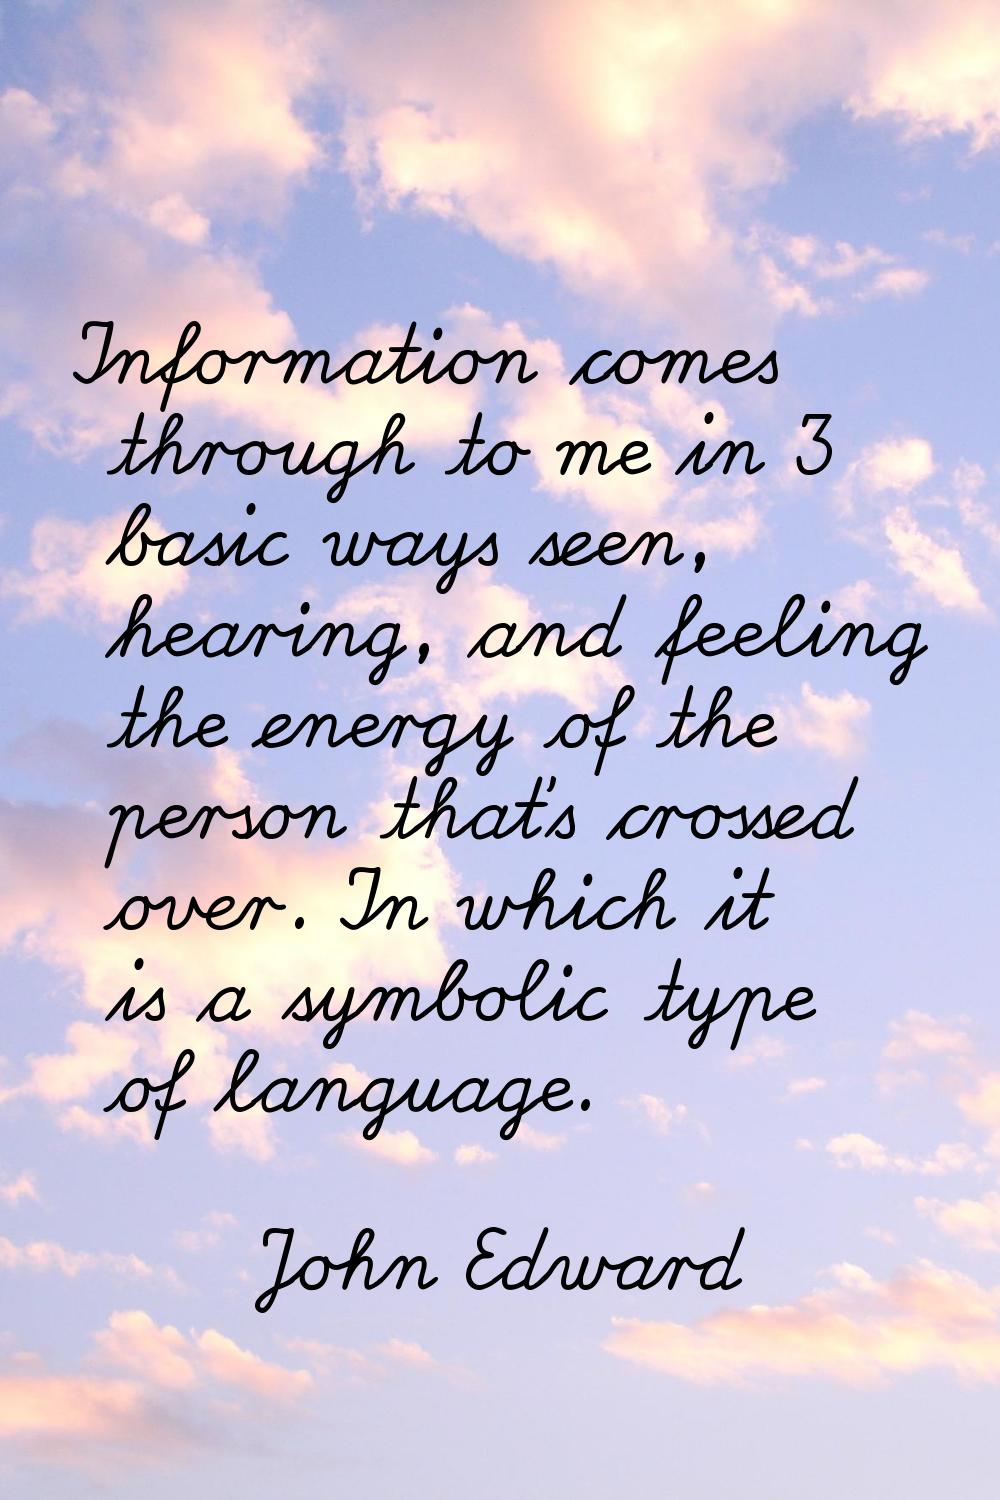 Information comes through to me in 3 basic ways seen, hearing, and feeling the energy of the person